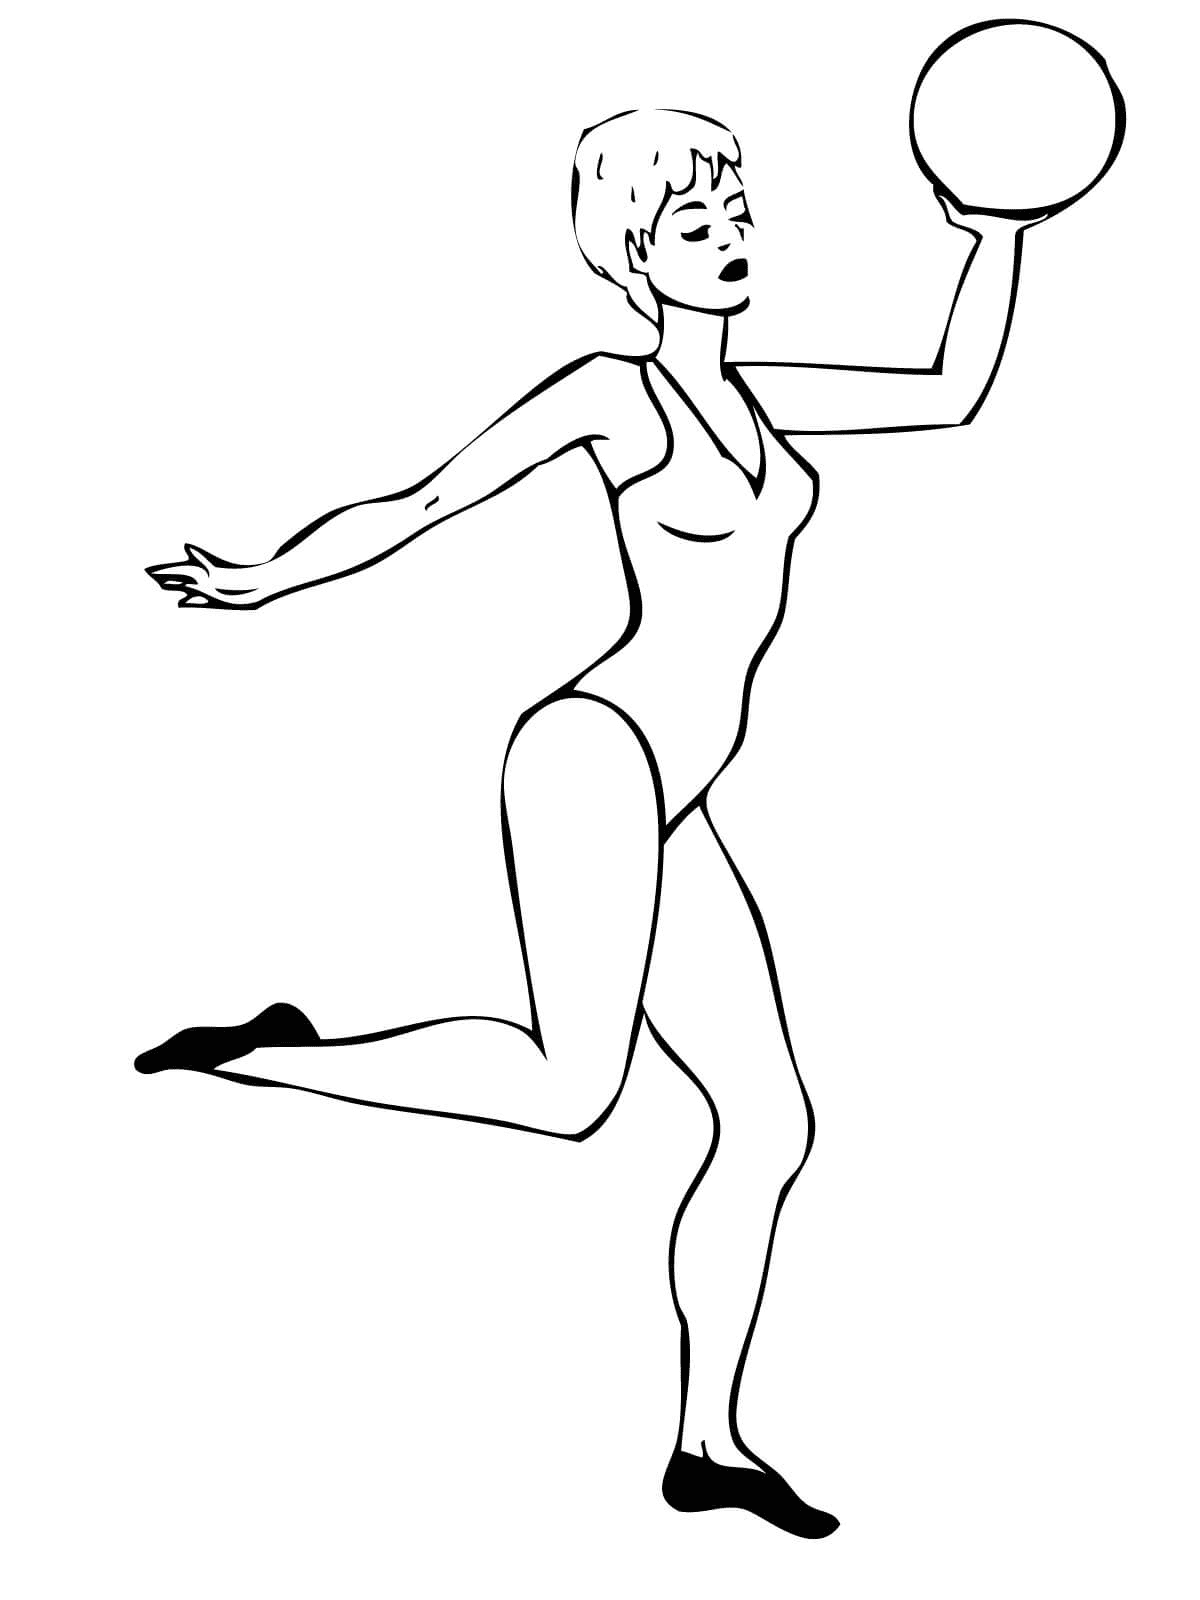 Rhythmic Gymnast Perfoming with a Ball Coloring Pages